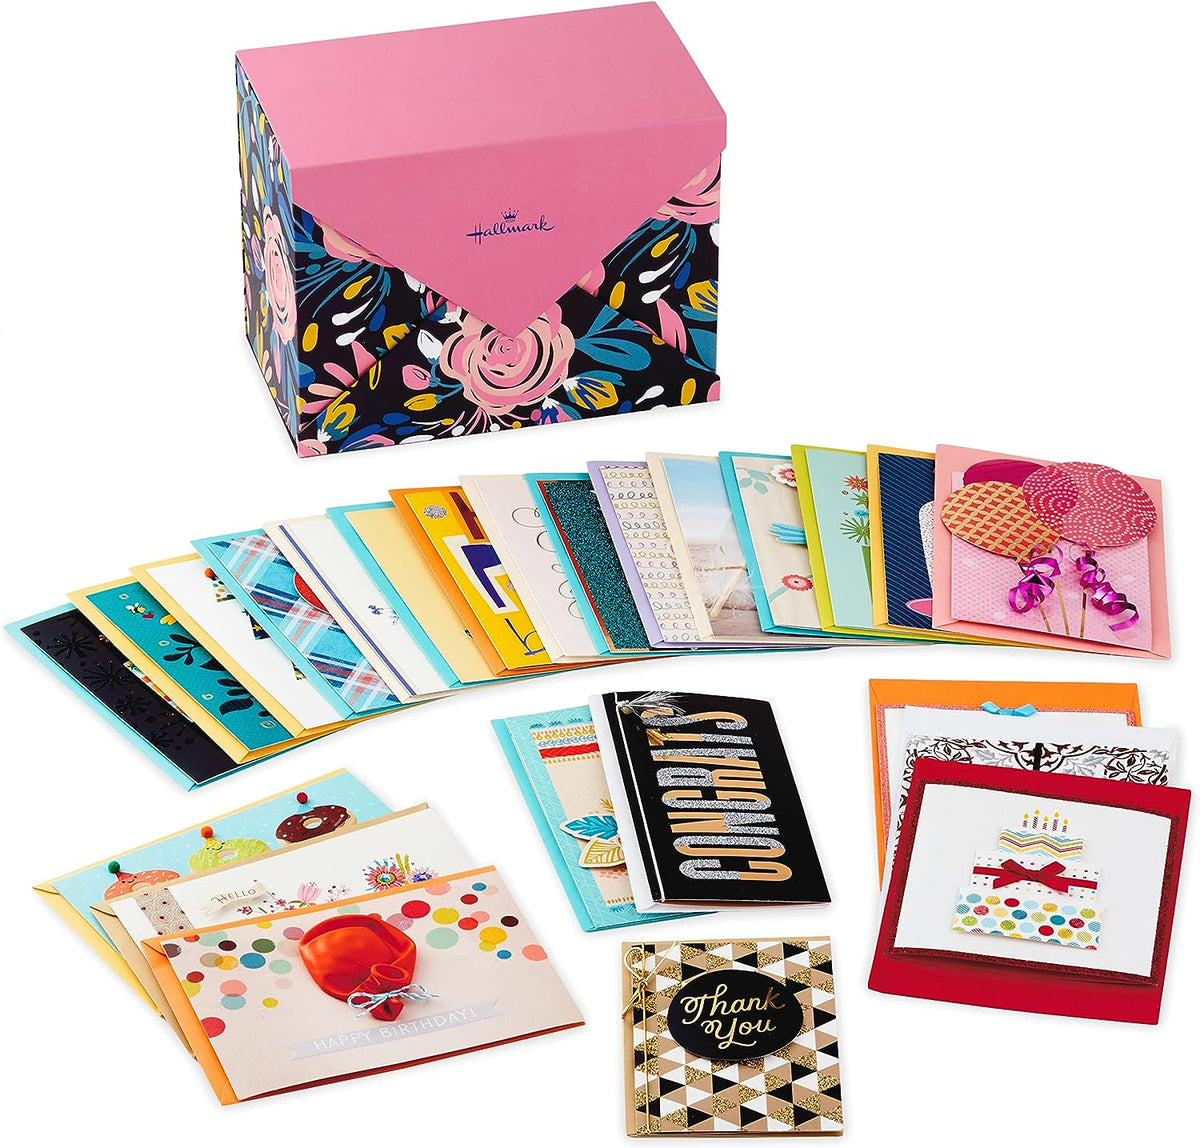 All Occasion Handmade Boxed Set of Assorted Greeting Cards with